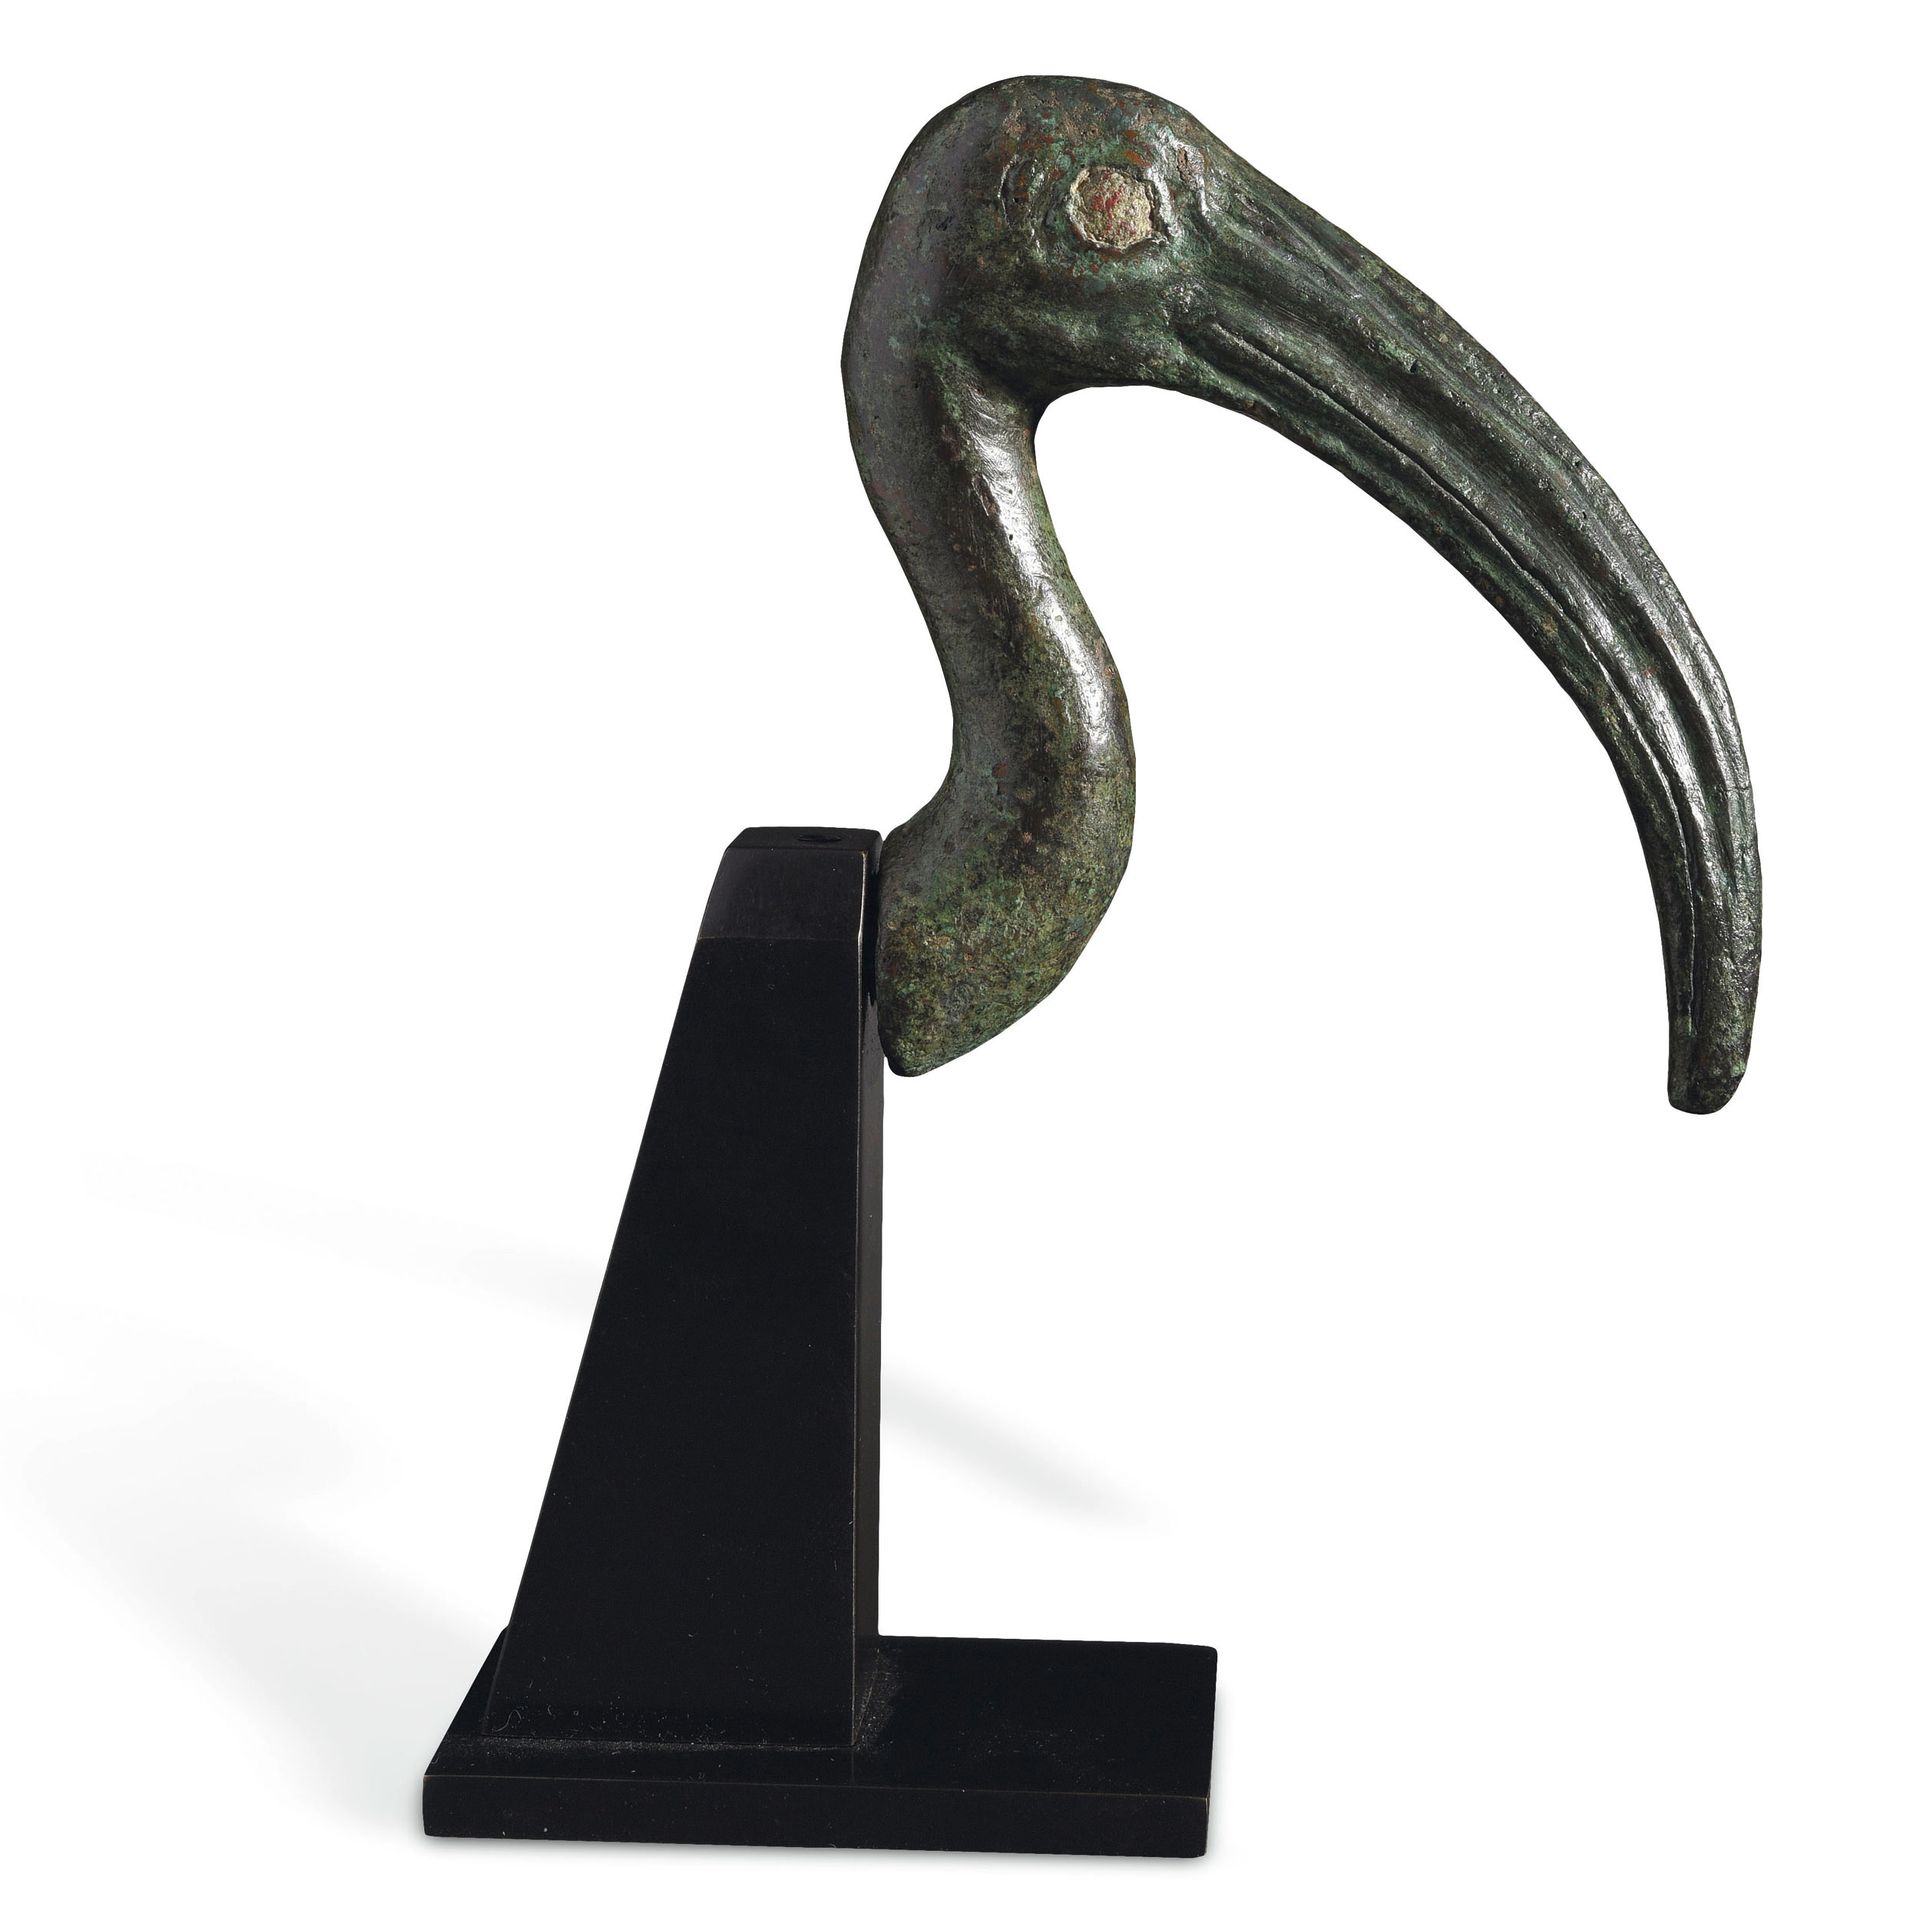 Null HEAD OF AN IBIS

Egypt, Late Period, 664-332 B.C. 

Bronze with green patin&hellip;